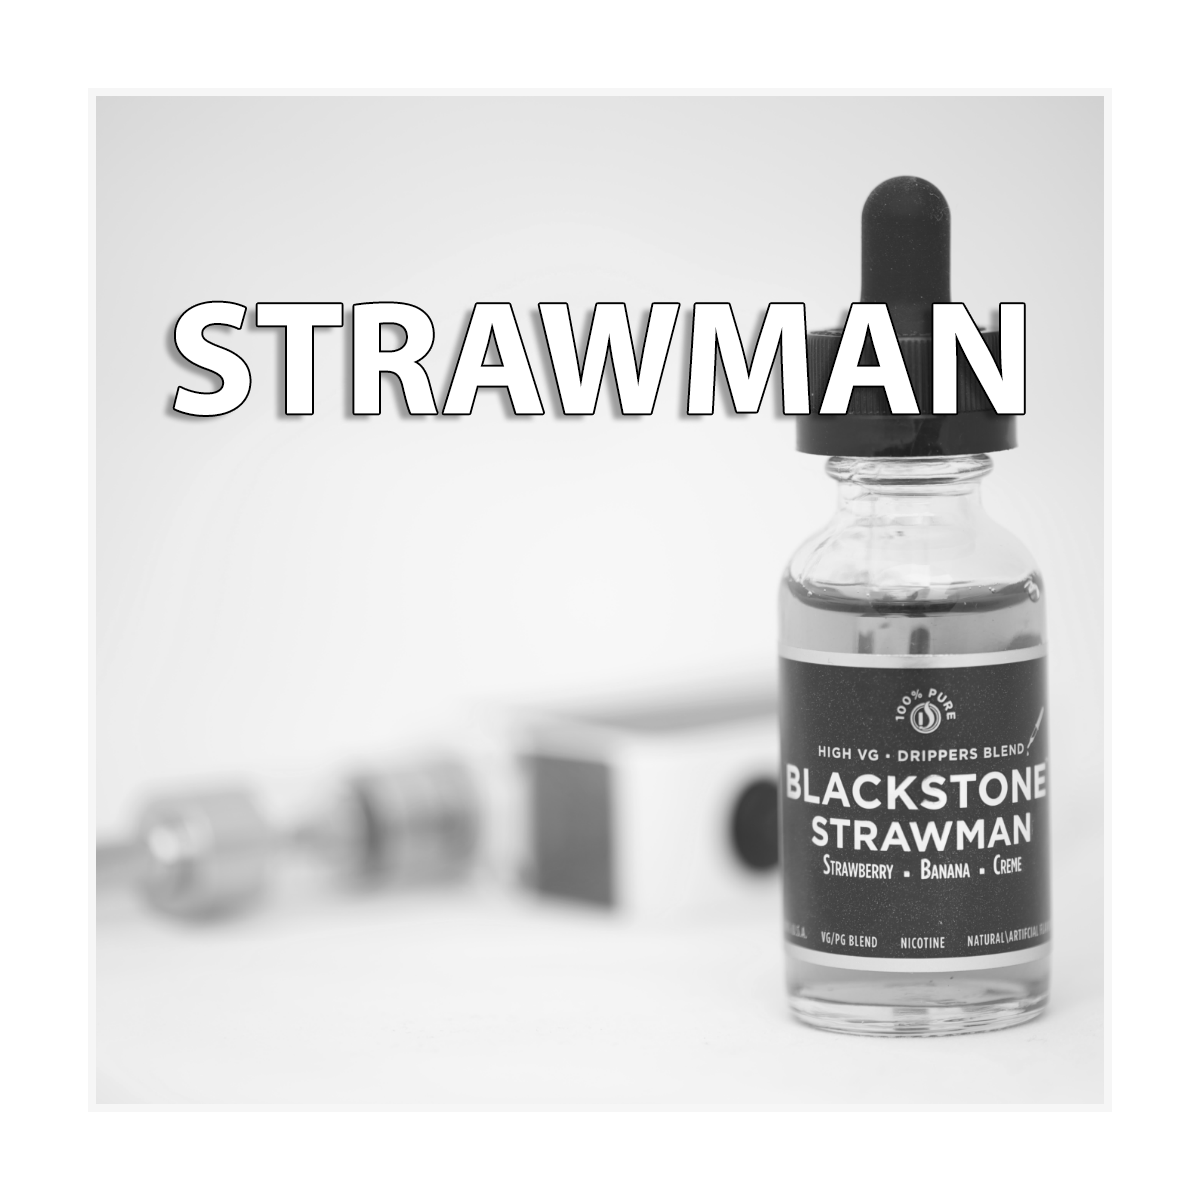 Strawman - Spinfuel Review